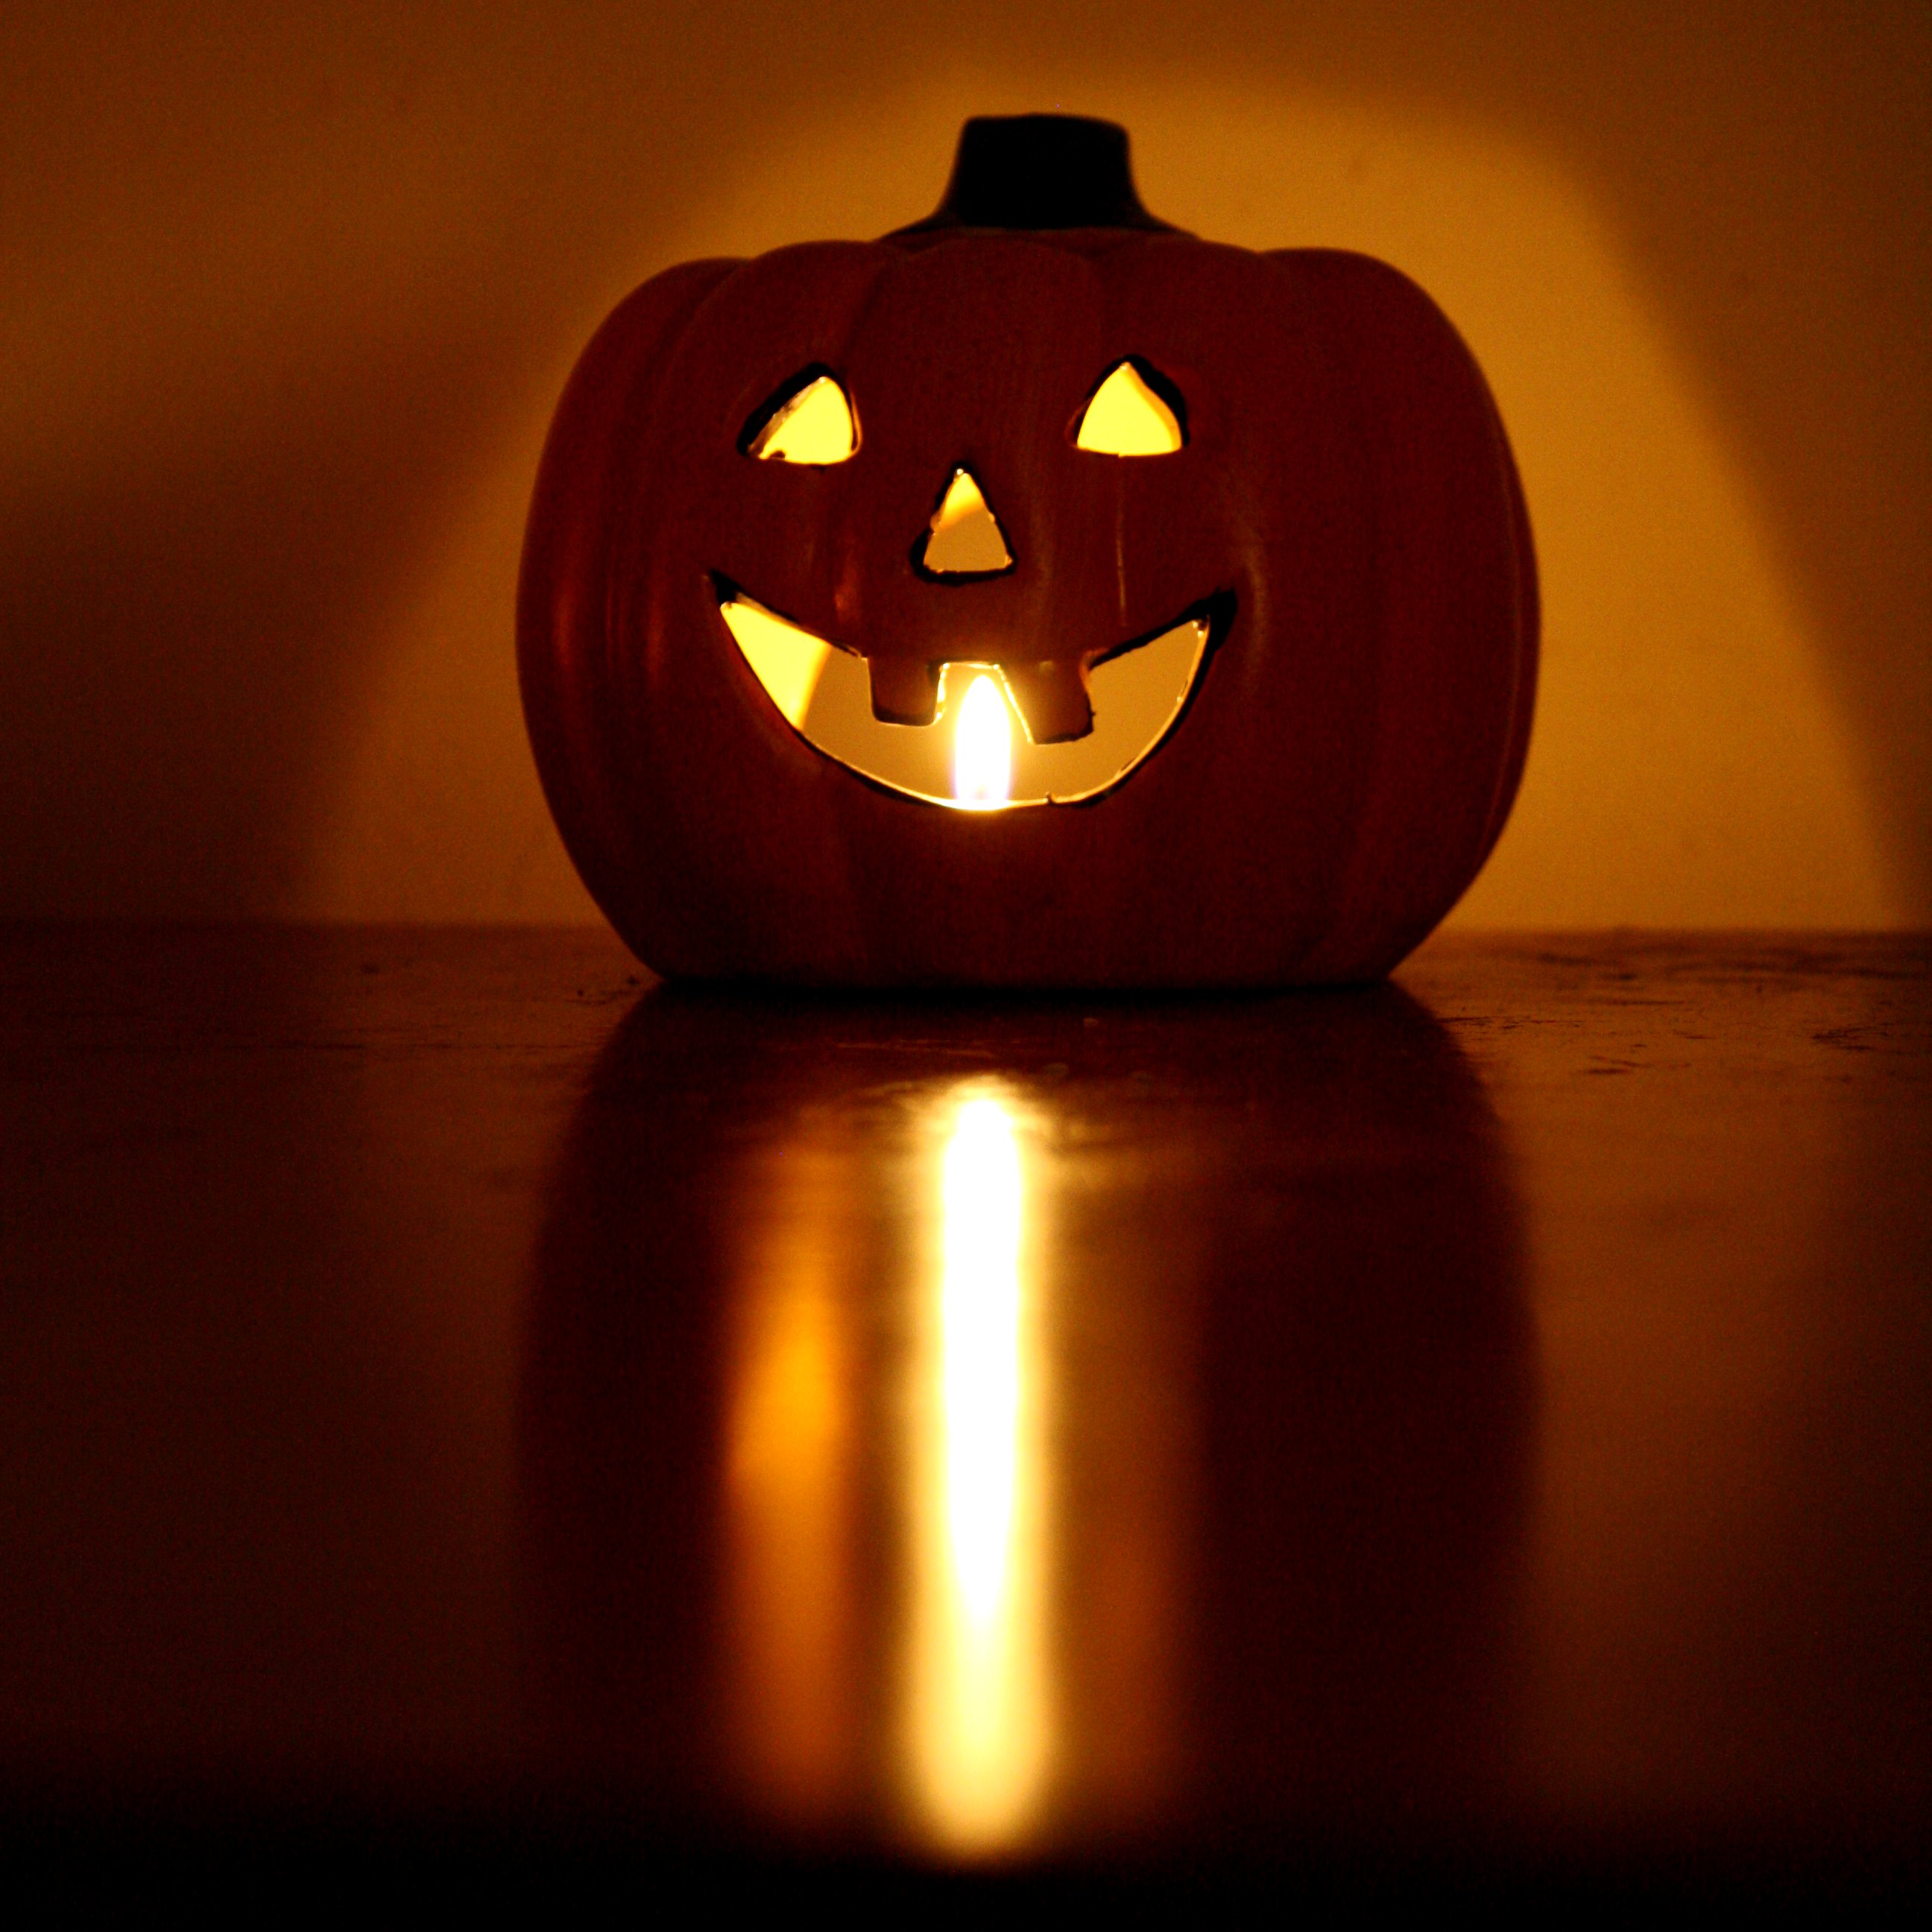 Halloween Pumpkin Candle with Burning Flame Picture. Free Photograph. Photo Public Domain